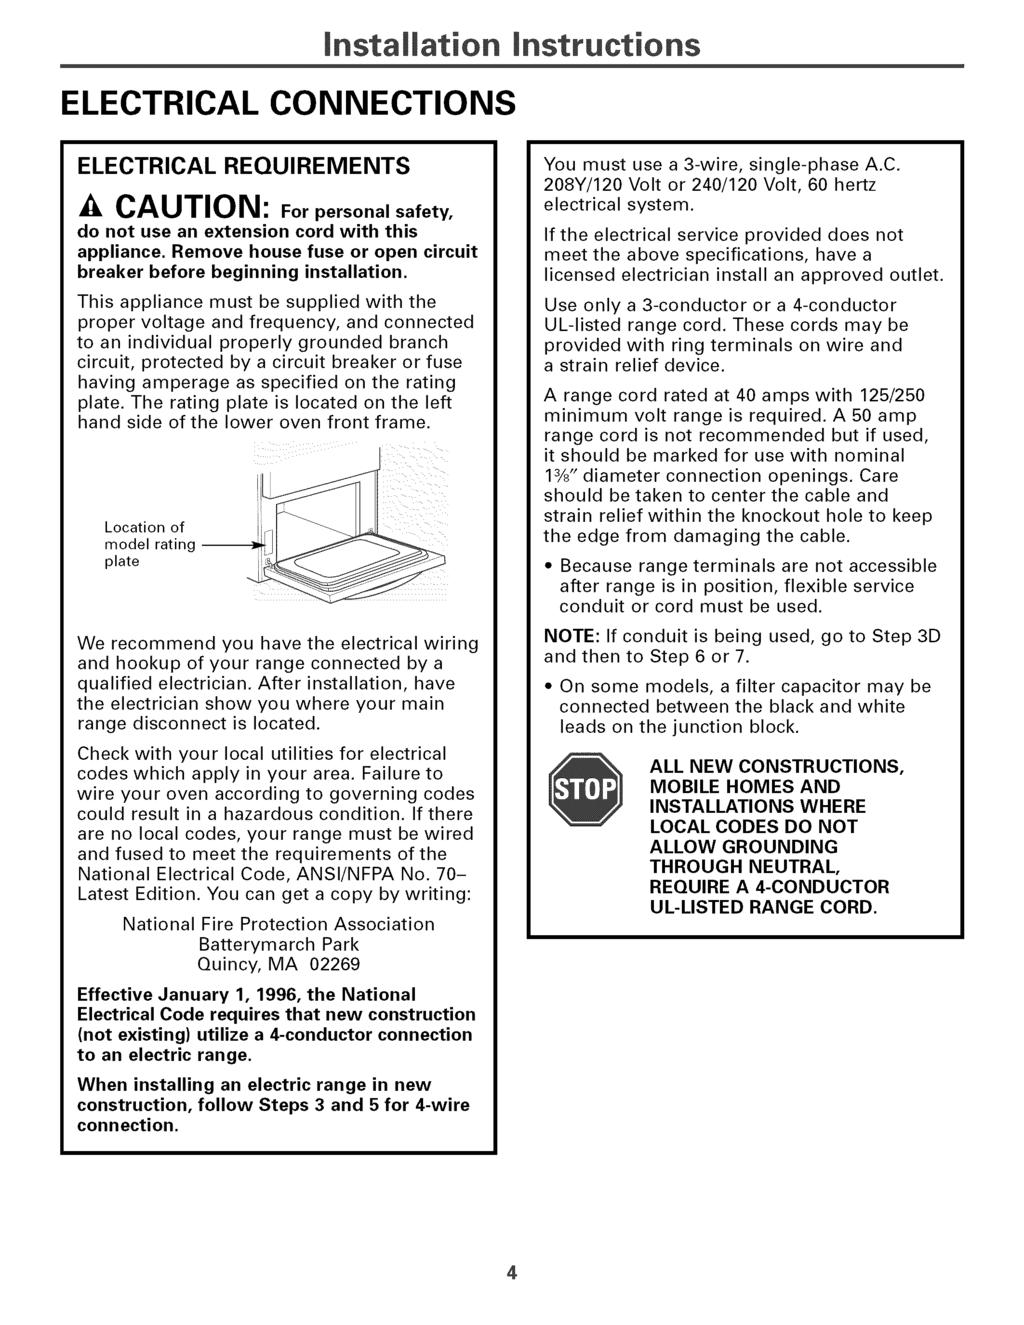 mnstaliation mnstructions ELECTRICAL CONNECTIONS ELECTRICAL REQUIREMENTS CAUTION: For personal safety, do not use an extension cord with this appliance.